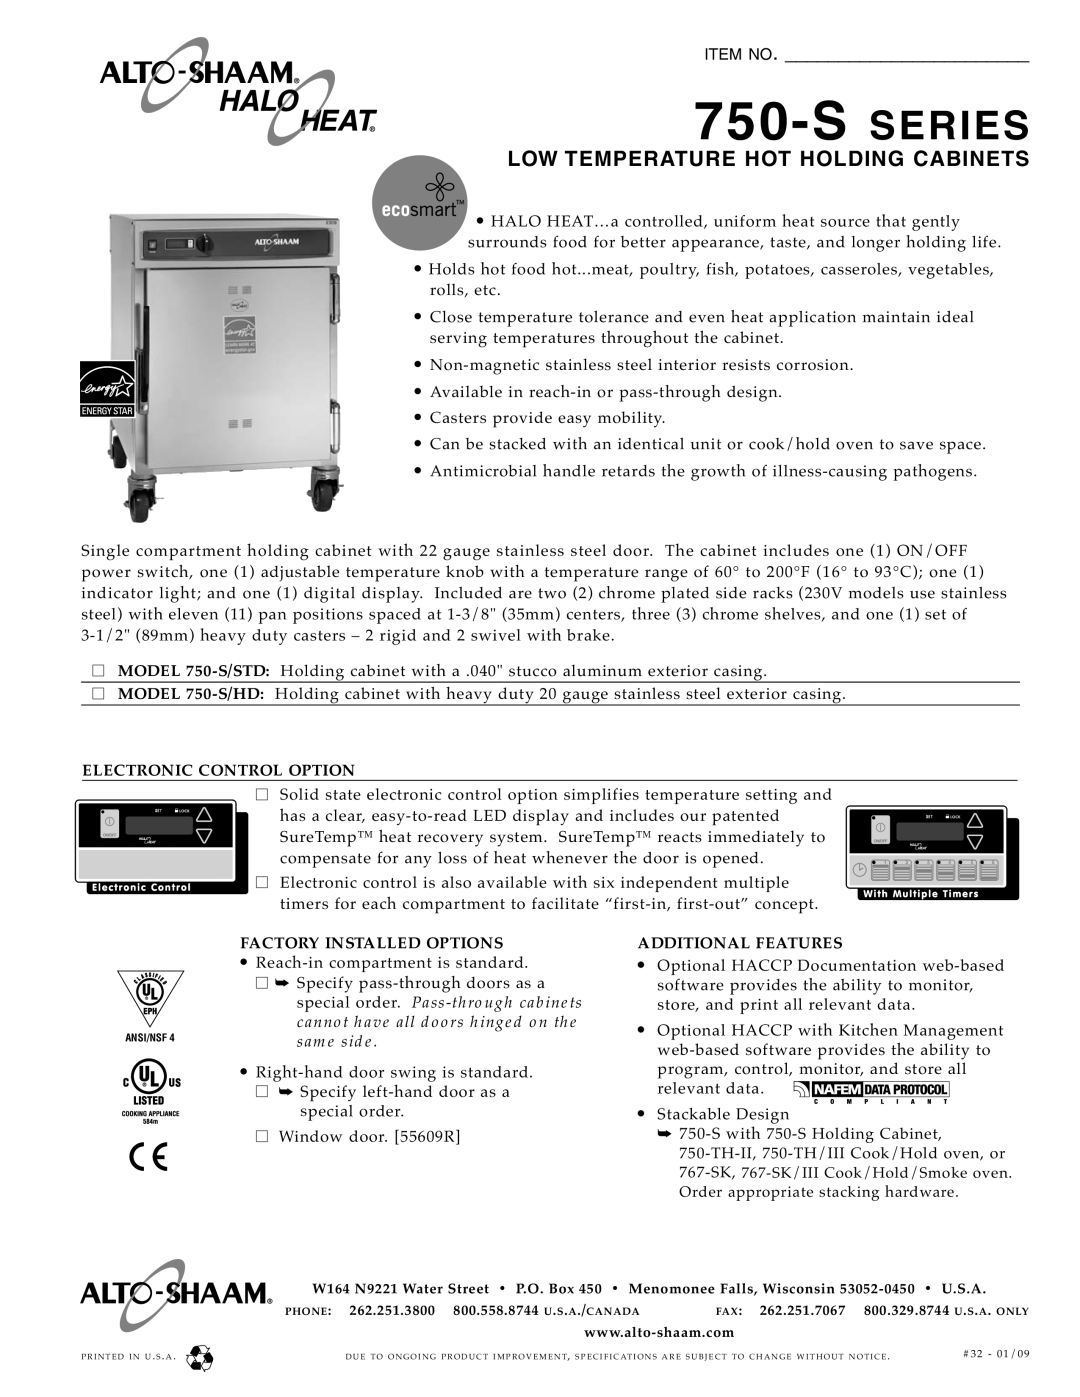 Alto-Shaam 750-S SERIES specifications S Series, Low Temperature Hot Holding Cabinets, Electronic Control Option, Item No 